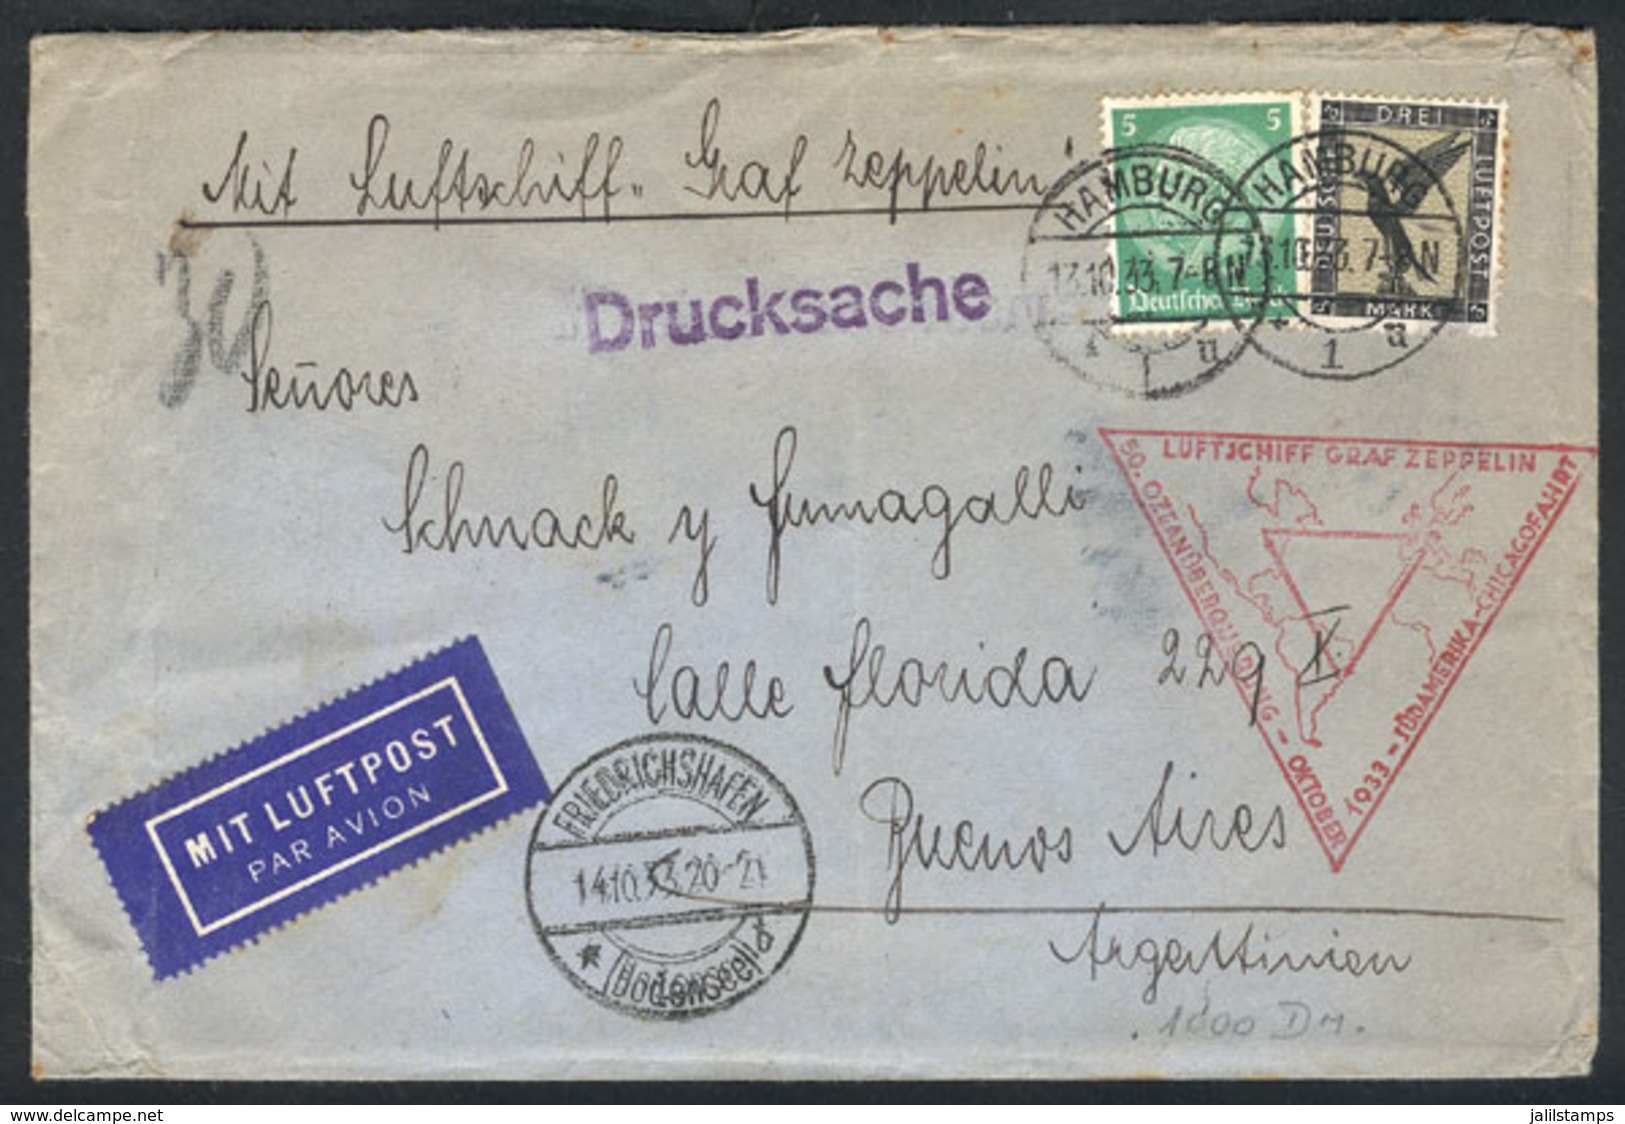 GERMANY: 13/OC/1933 Hamburg - Buenos Aires: Cover With PRINTED MATTER Flown By Zeppelin, Franked With 3.05Mk., With Tria - [Voorlopers